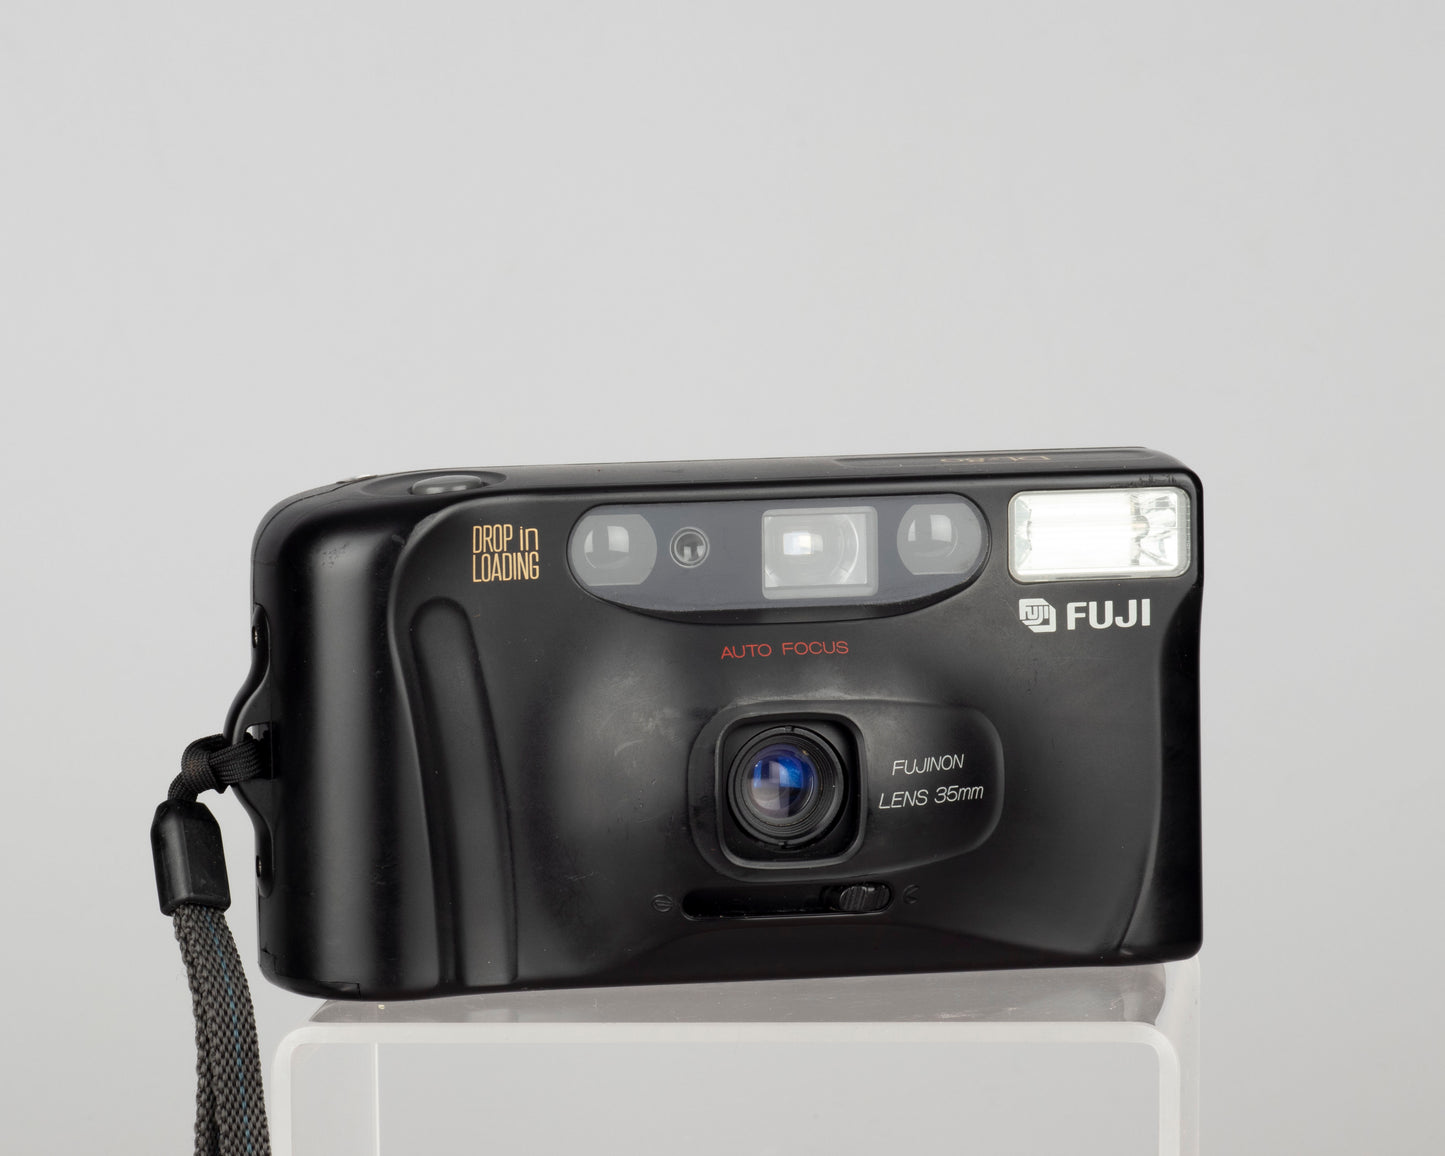 The Fujifilm DL-80 is a compact 35mm film camera from the 1990s